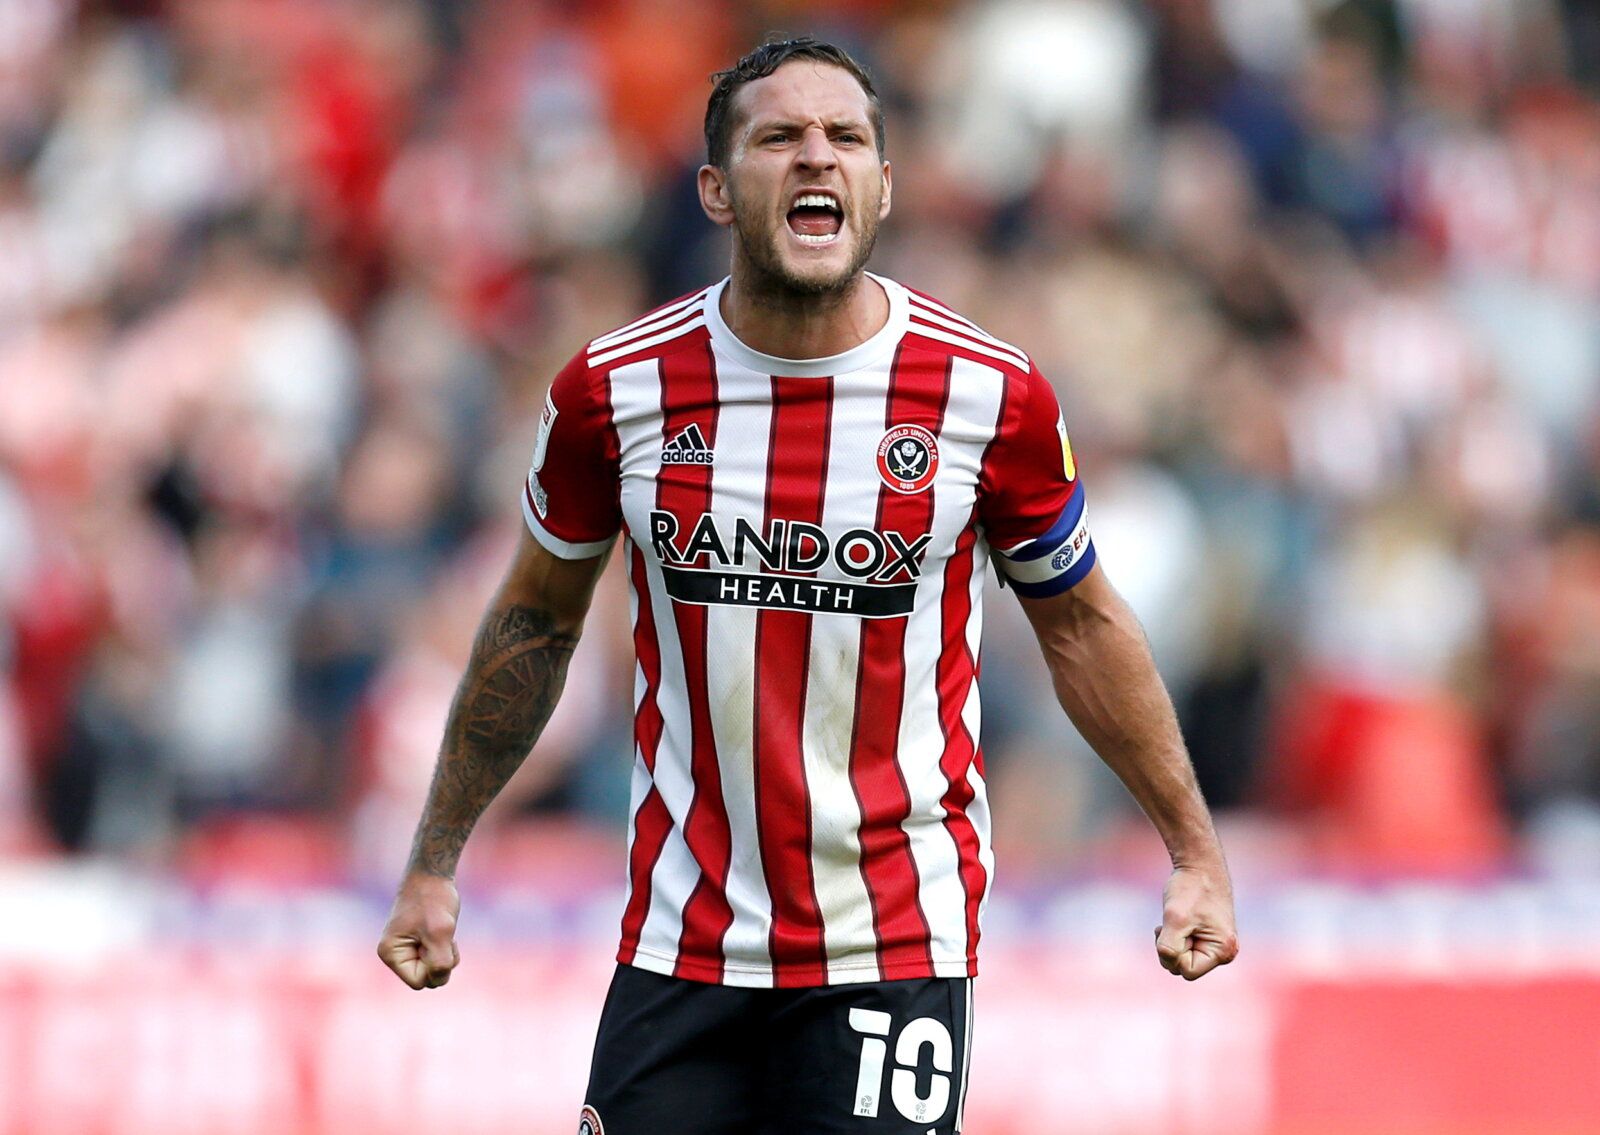 Soccer Football - Championship - Sheffield United v Derby County - Bramall Lane, Sheffield, Britain - September 25, 2021  Sheffield United's Billy Sharp celebrates after the match   Action Images/Ed Sykes  EDITORIAL USE ONLY. No use with unauthorized audio, video, data, fixture lists, club/league logos or 